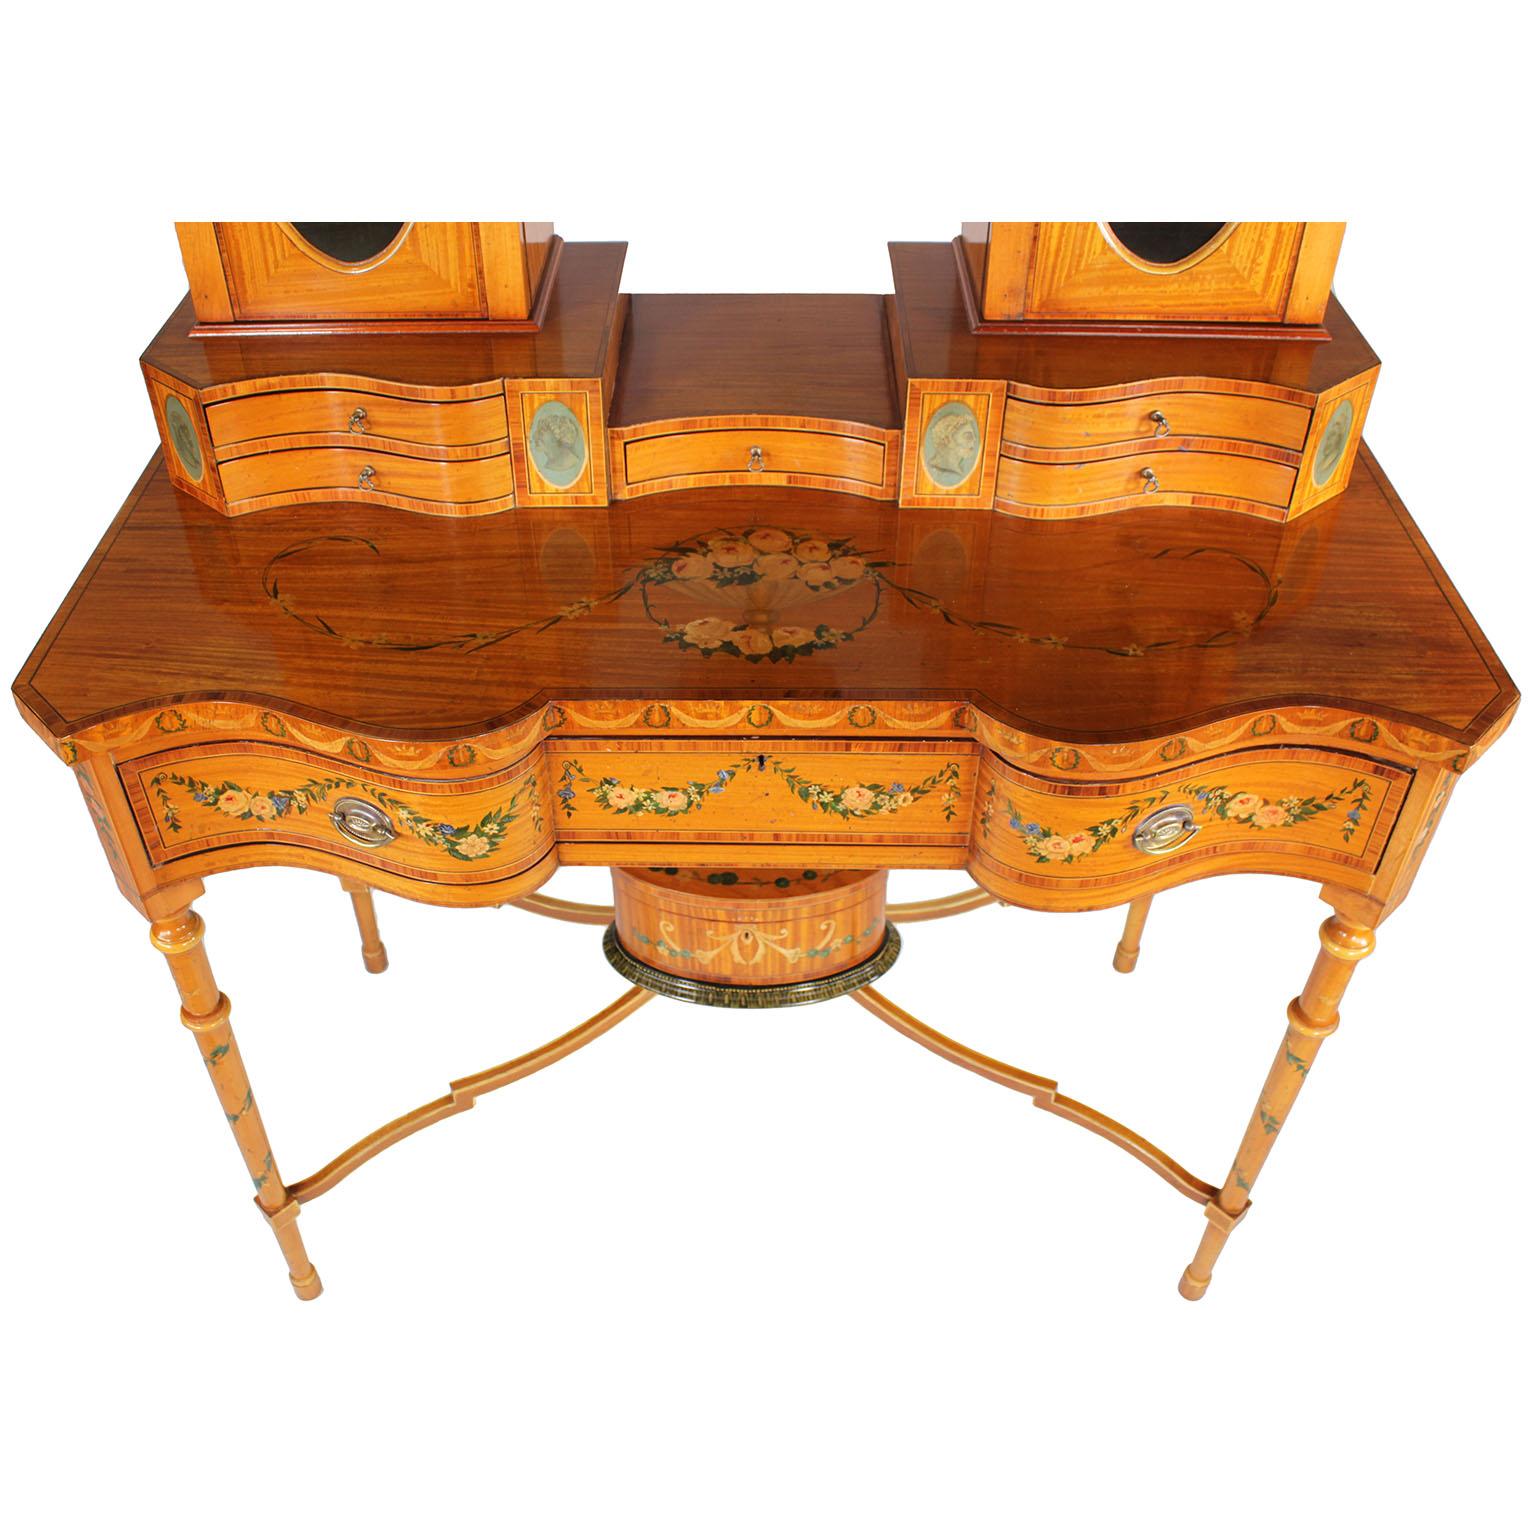 Fine English 19th Century Adam Style Polychrome Painted Satinwood Vanity Table For Sale 2